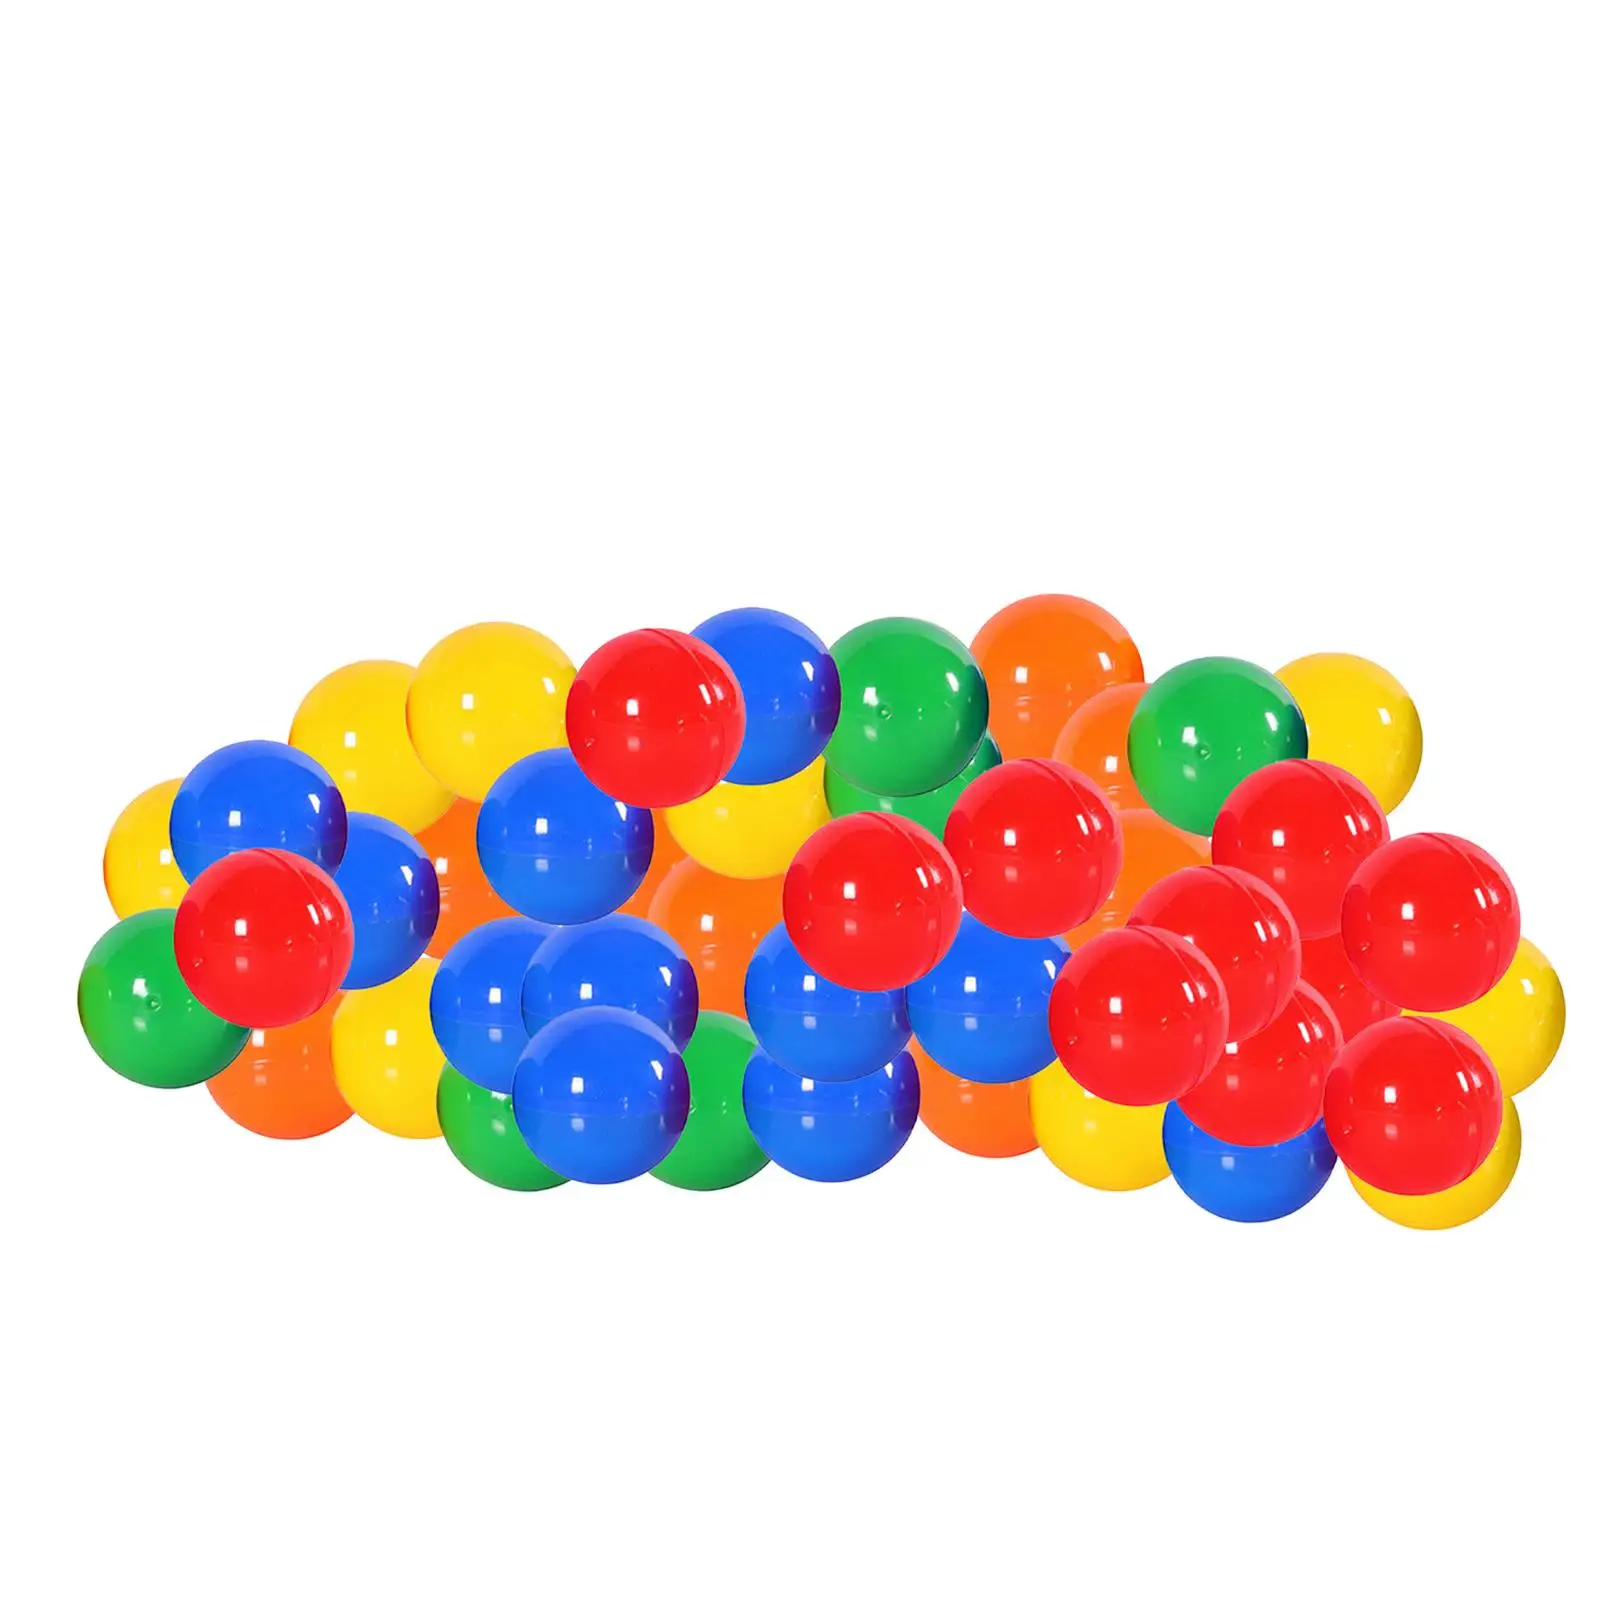 50Pcs Bingo Ball Opening Portable Direct Replaces Accessories Lottery Balls for Birthday Large Group Games Nights camping